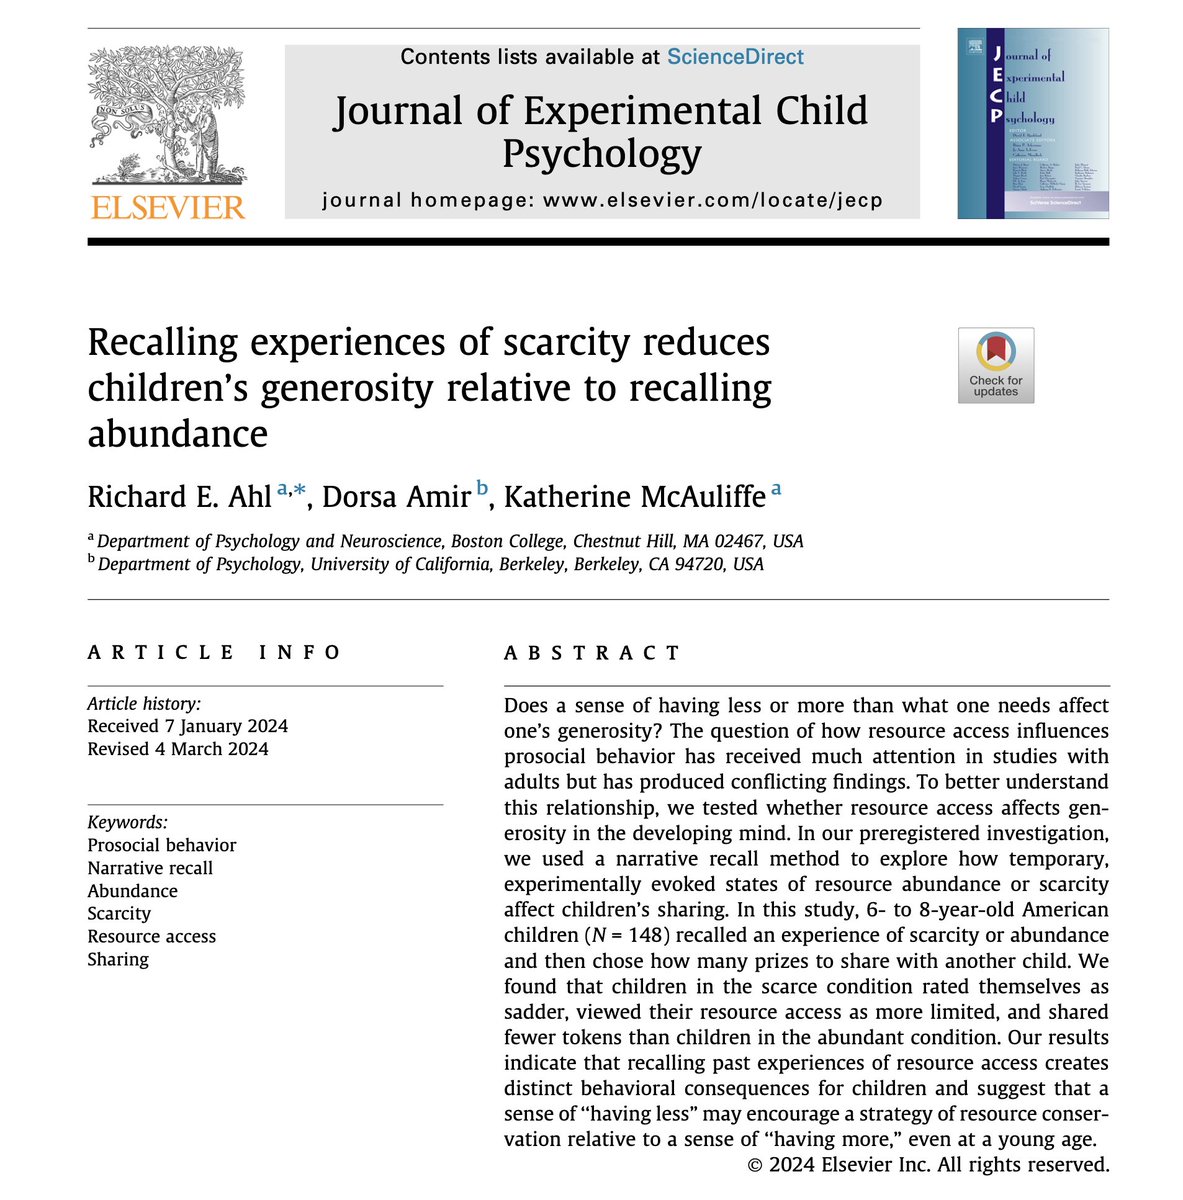 Our new paper is out now in JECP: Among 6-8 year old American kids, recalling experiences of scarcity reduces generosity (as compared to recalling abundance). Even at a young age, subjective views of resource access have behavioral consequences. sciencedirect.com/science/articl…